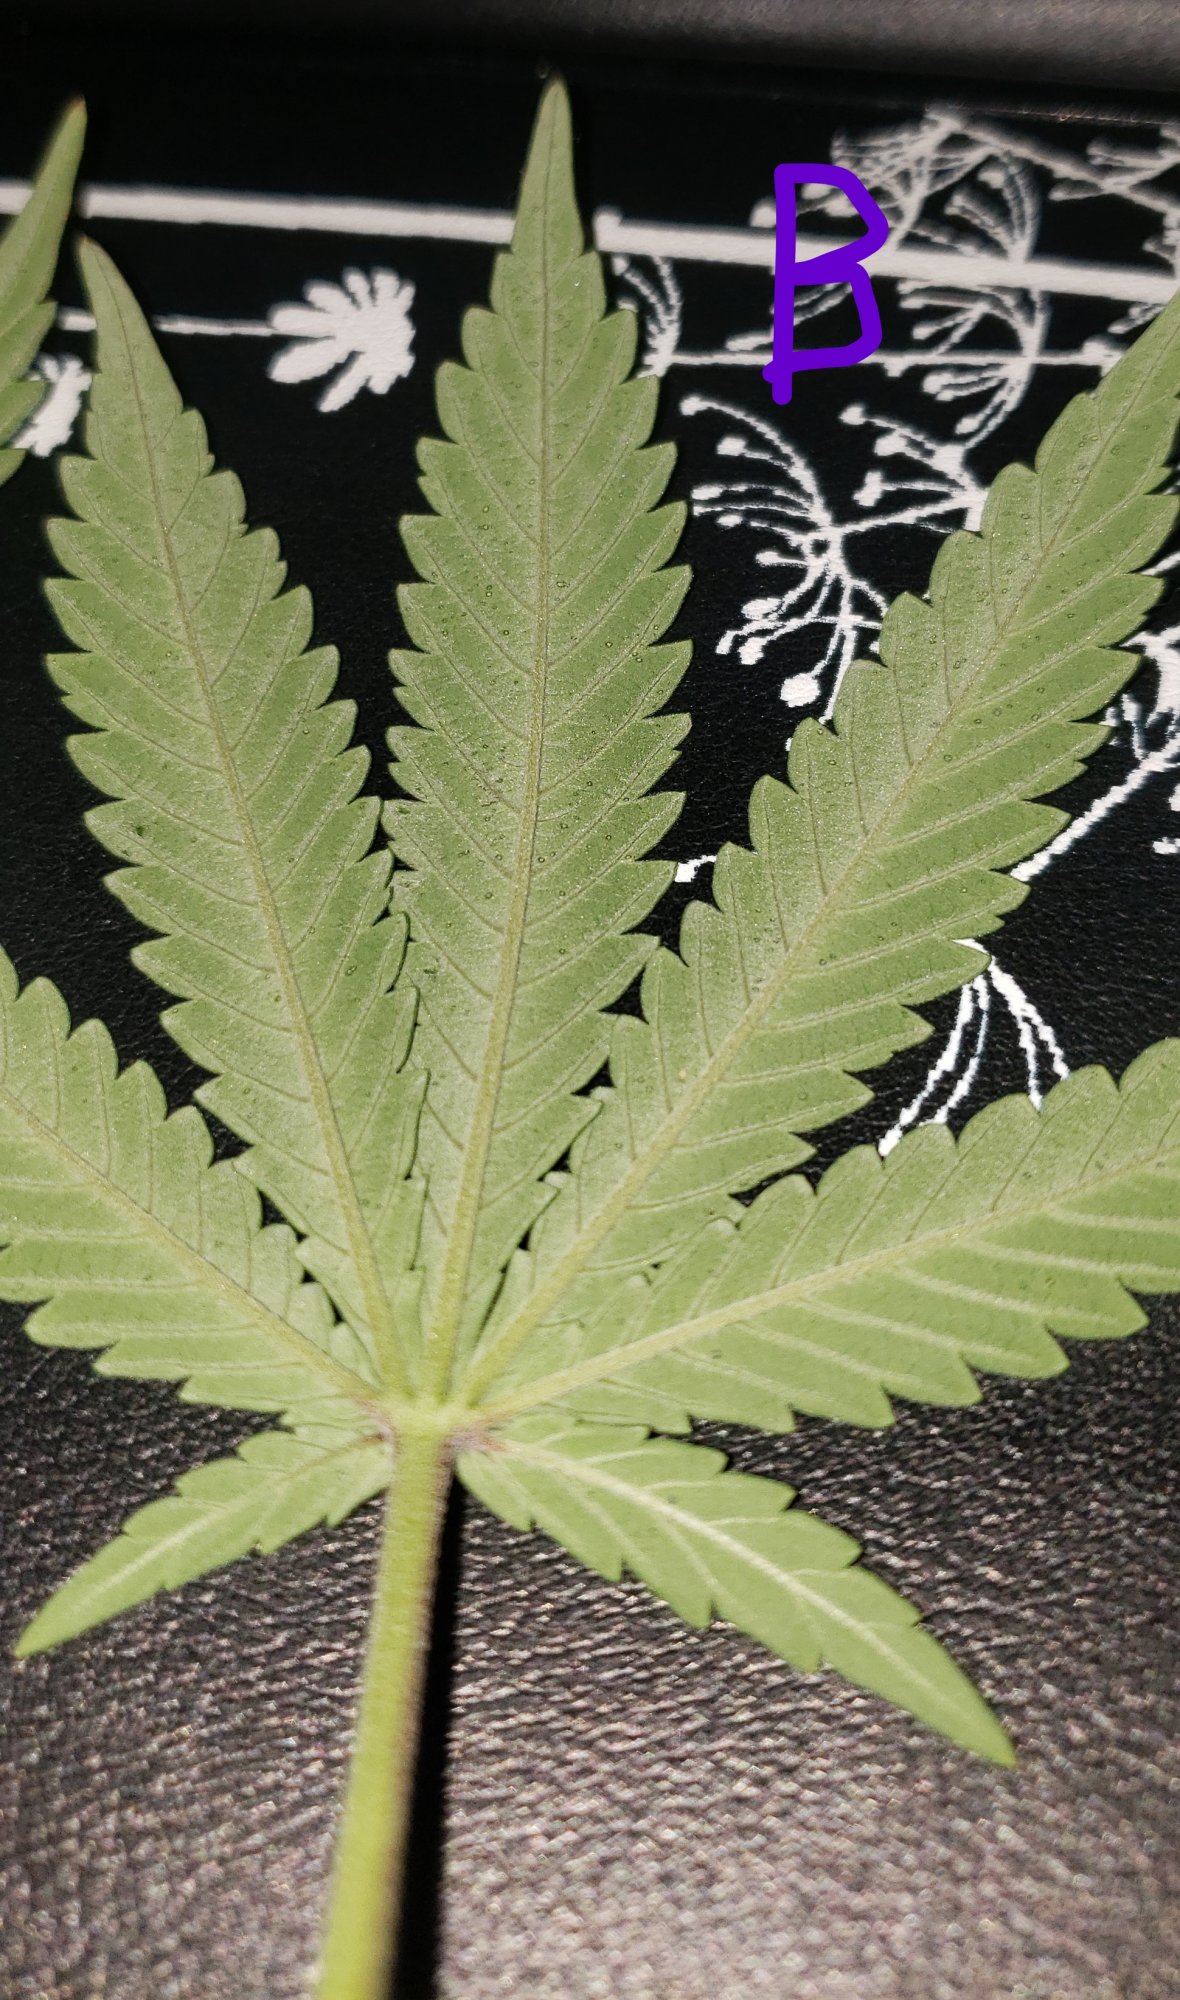 Threatco   little black circles   flowering day 22 7